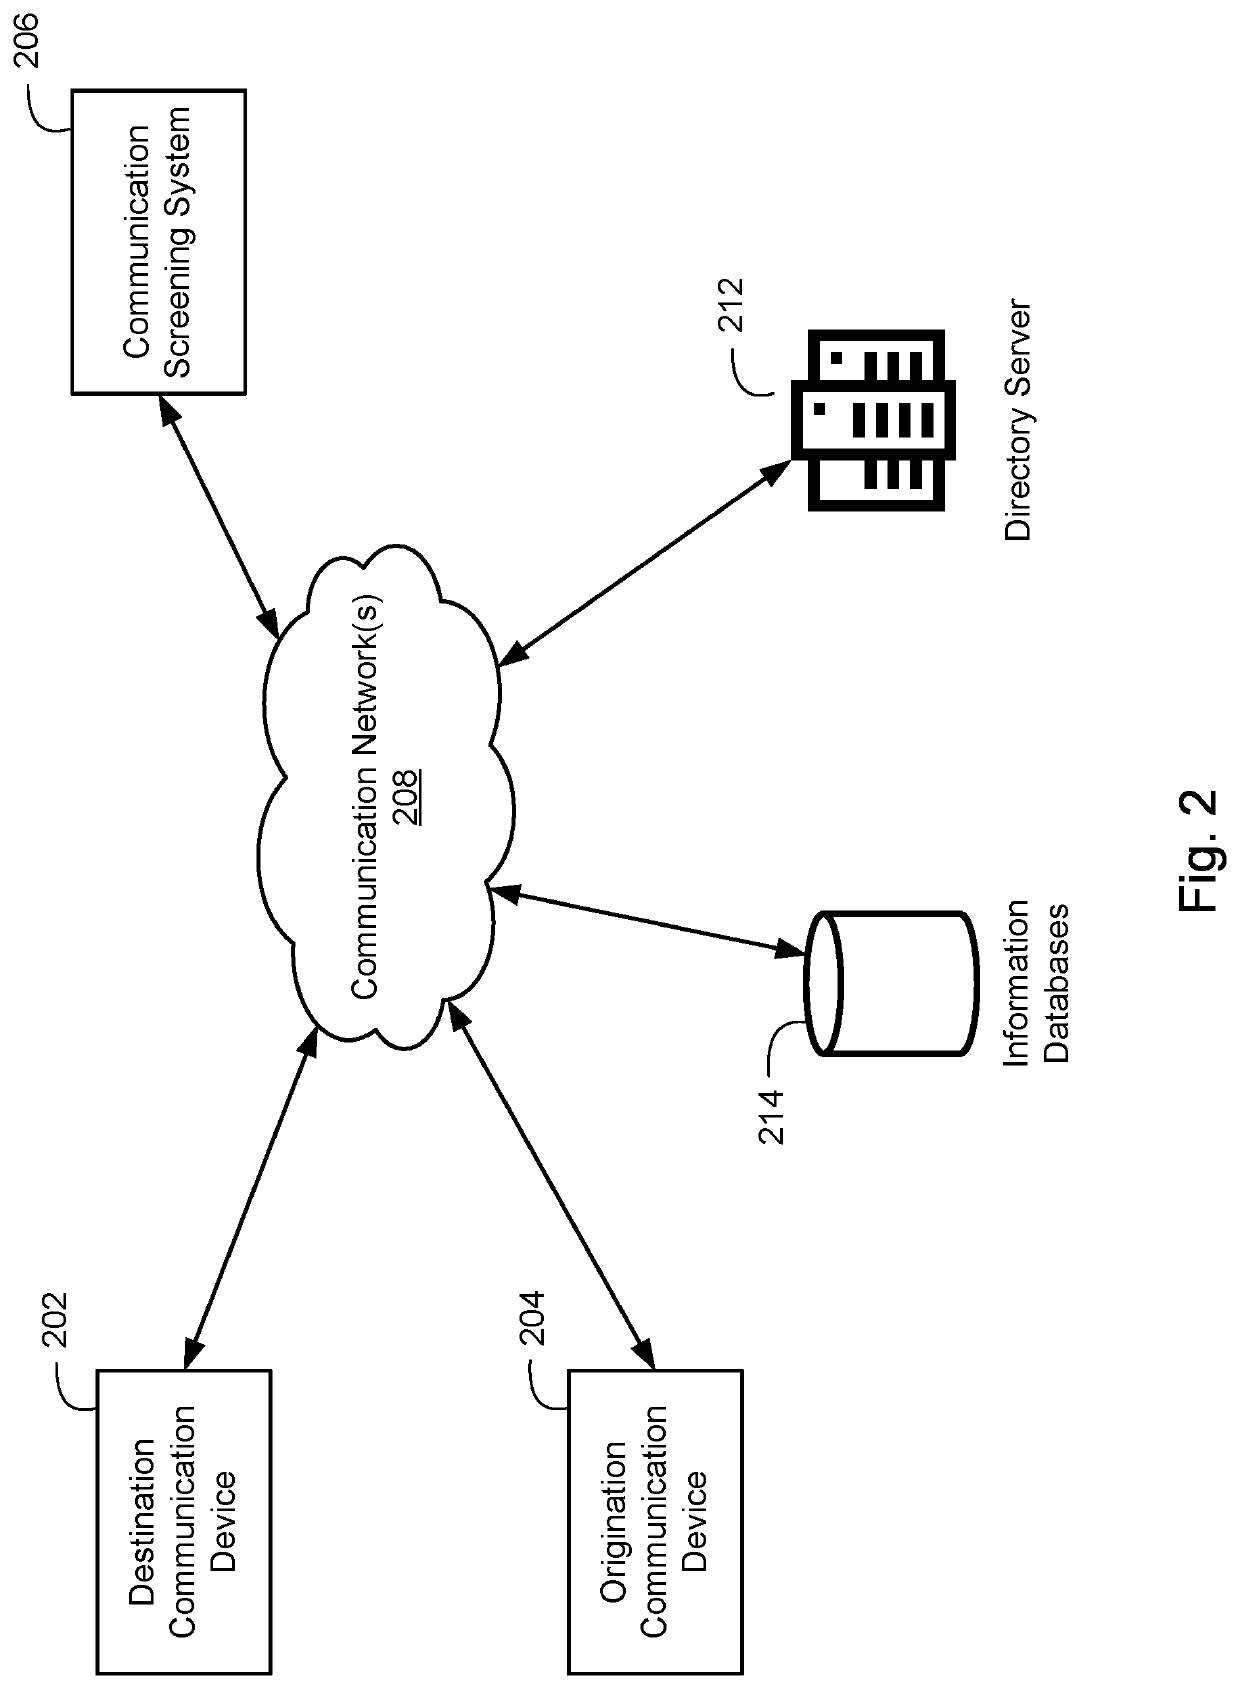 System and method for determining unwanted call origination in communications networks